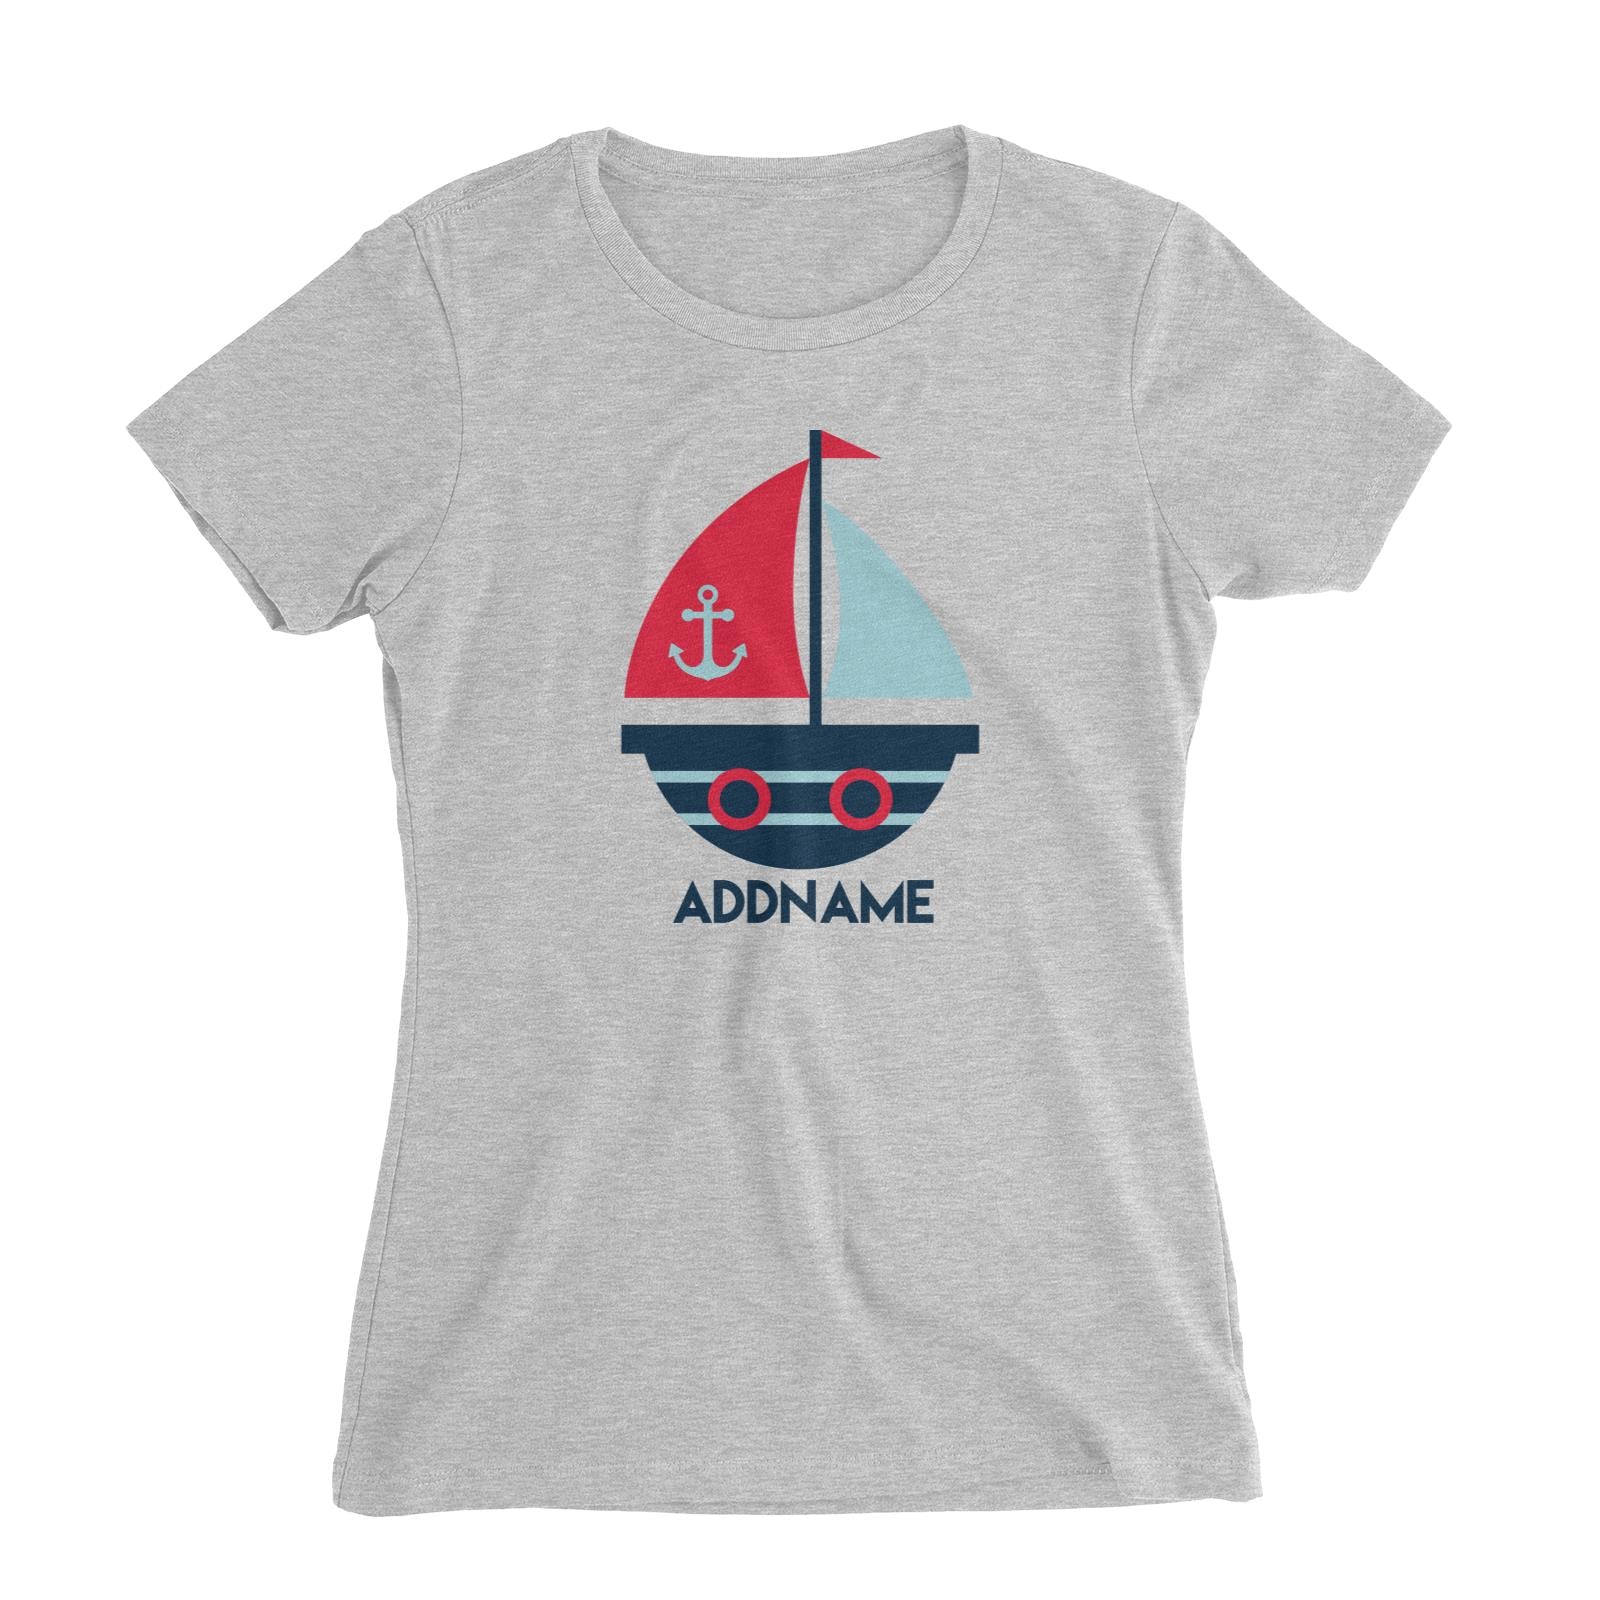 Sailor Boat Addname Women's Slim Fit T-Shirt  Matching Family Personalizable Designs